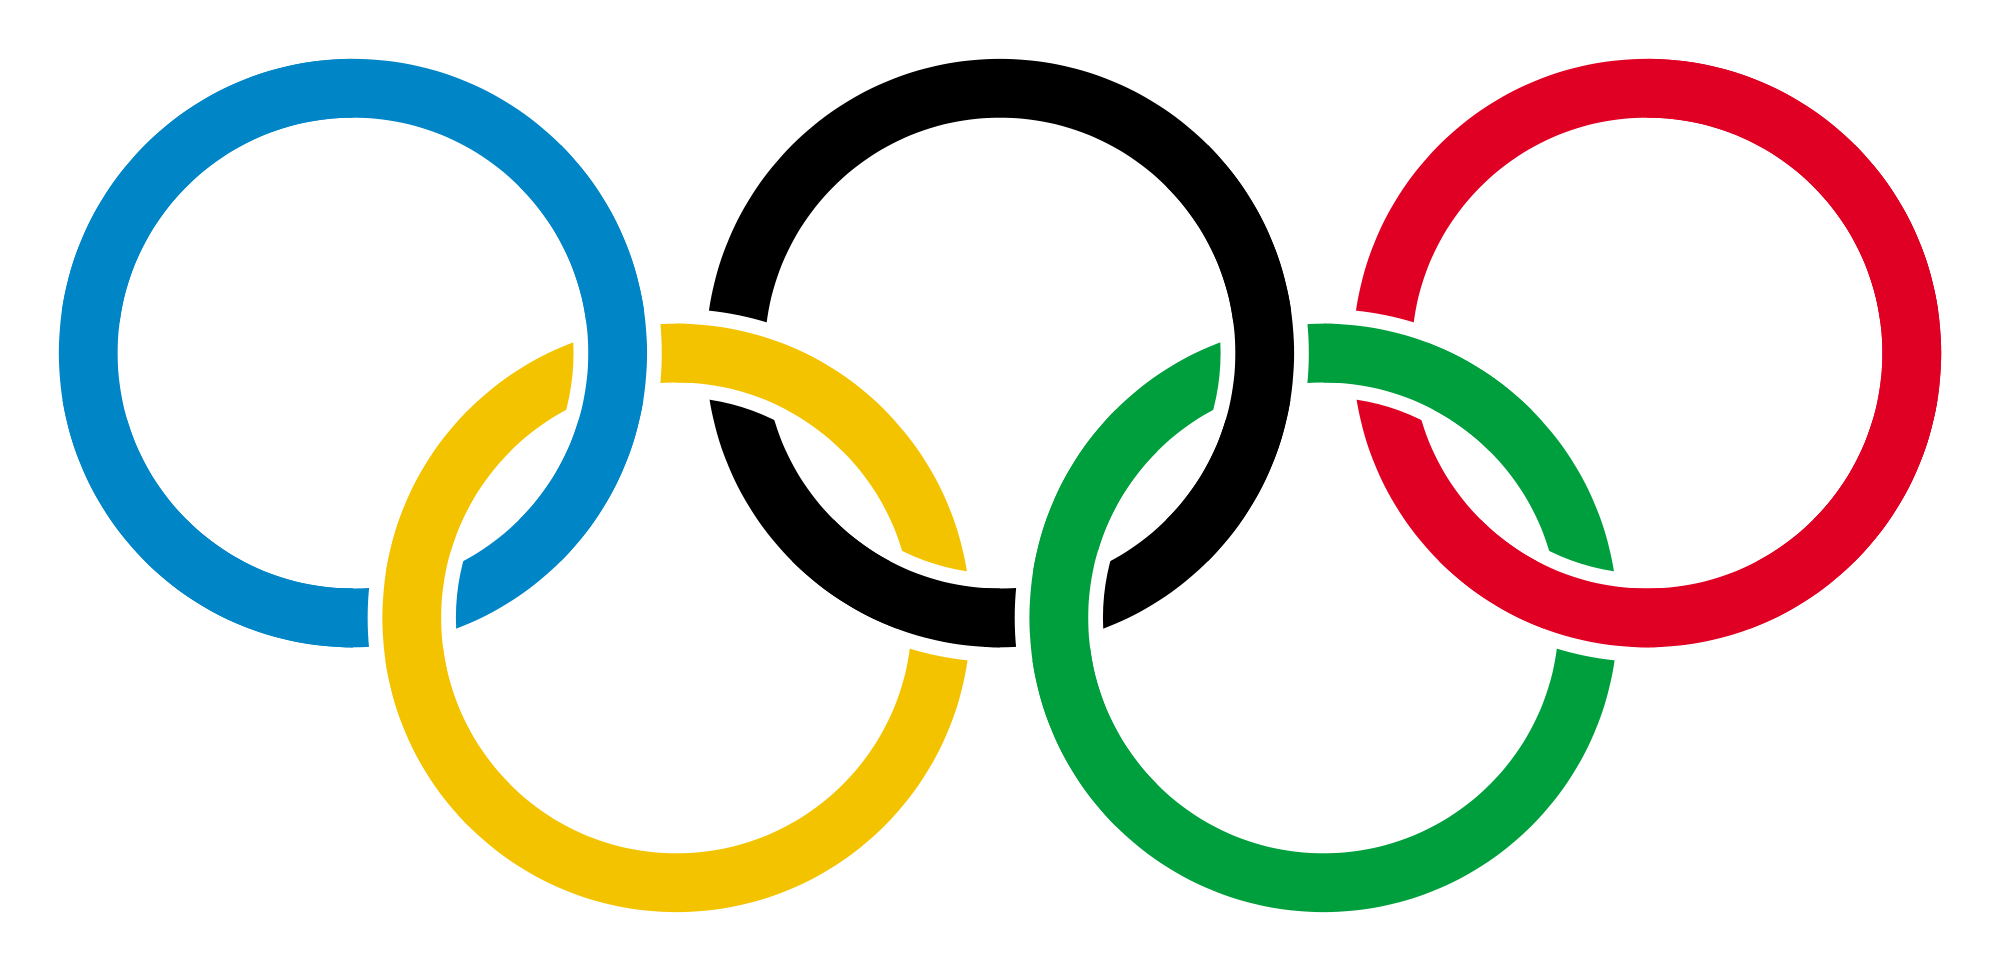 olympic rings, russian news agency crack down social media usage #26279